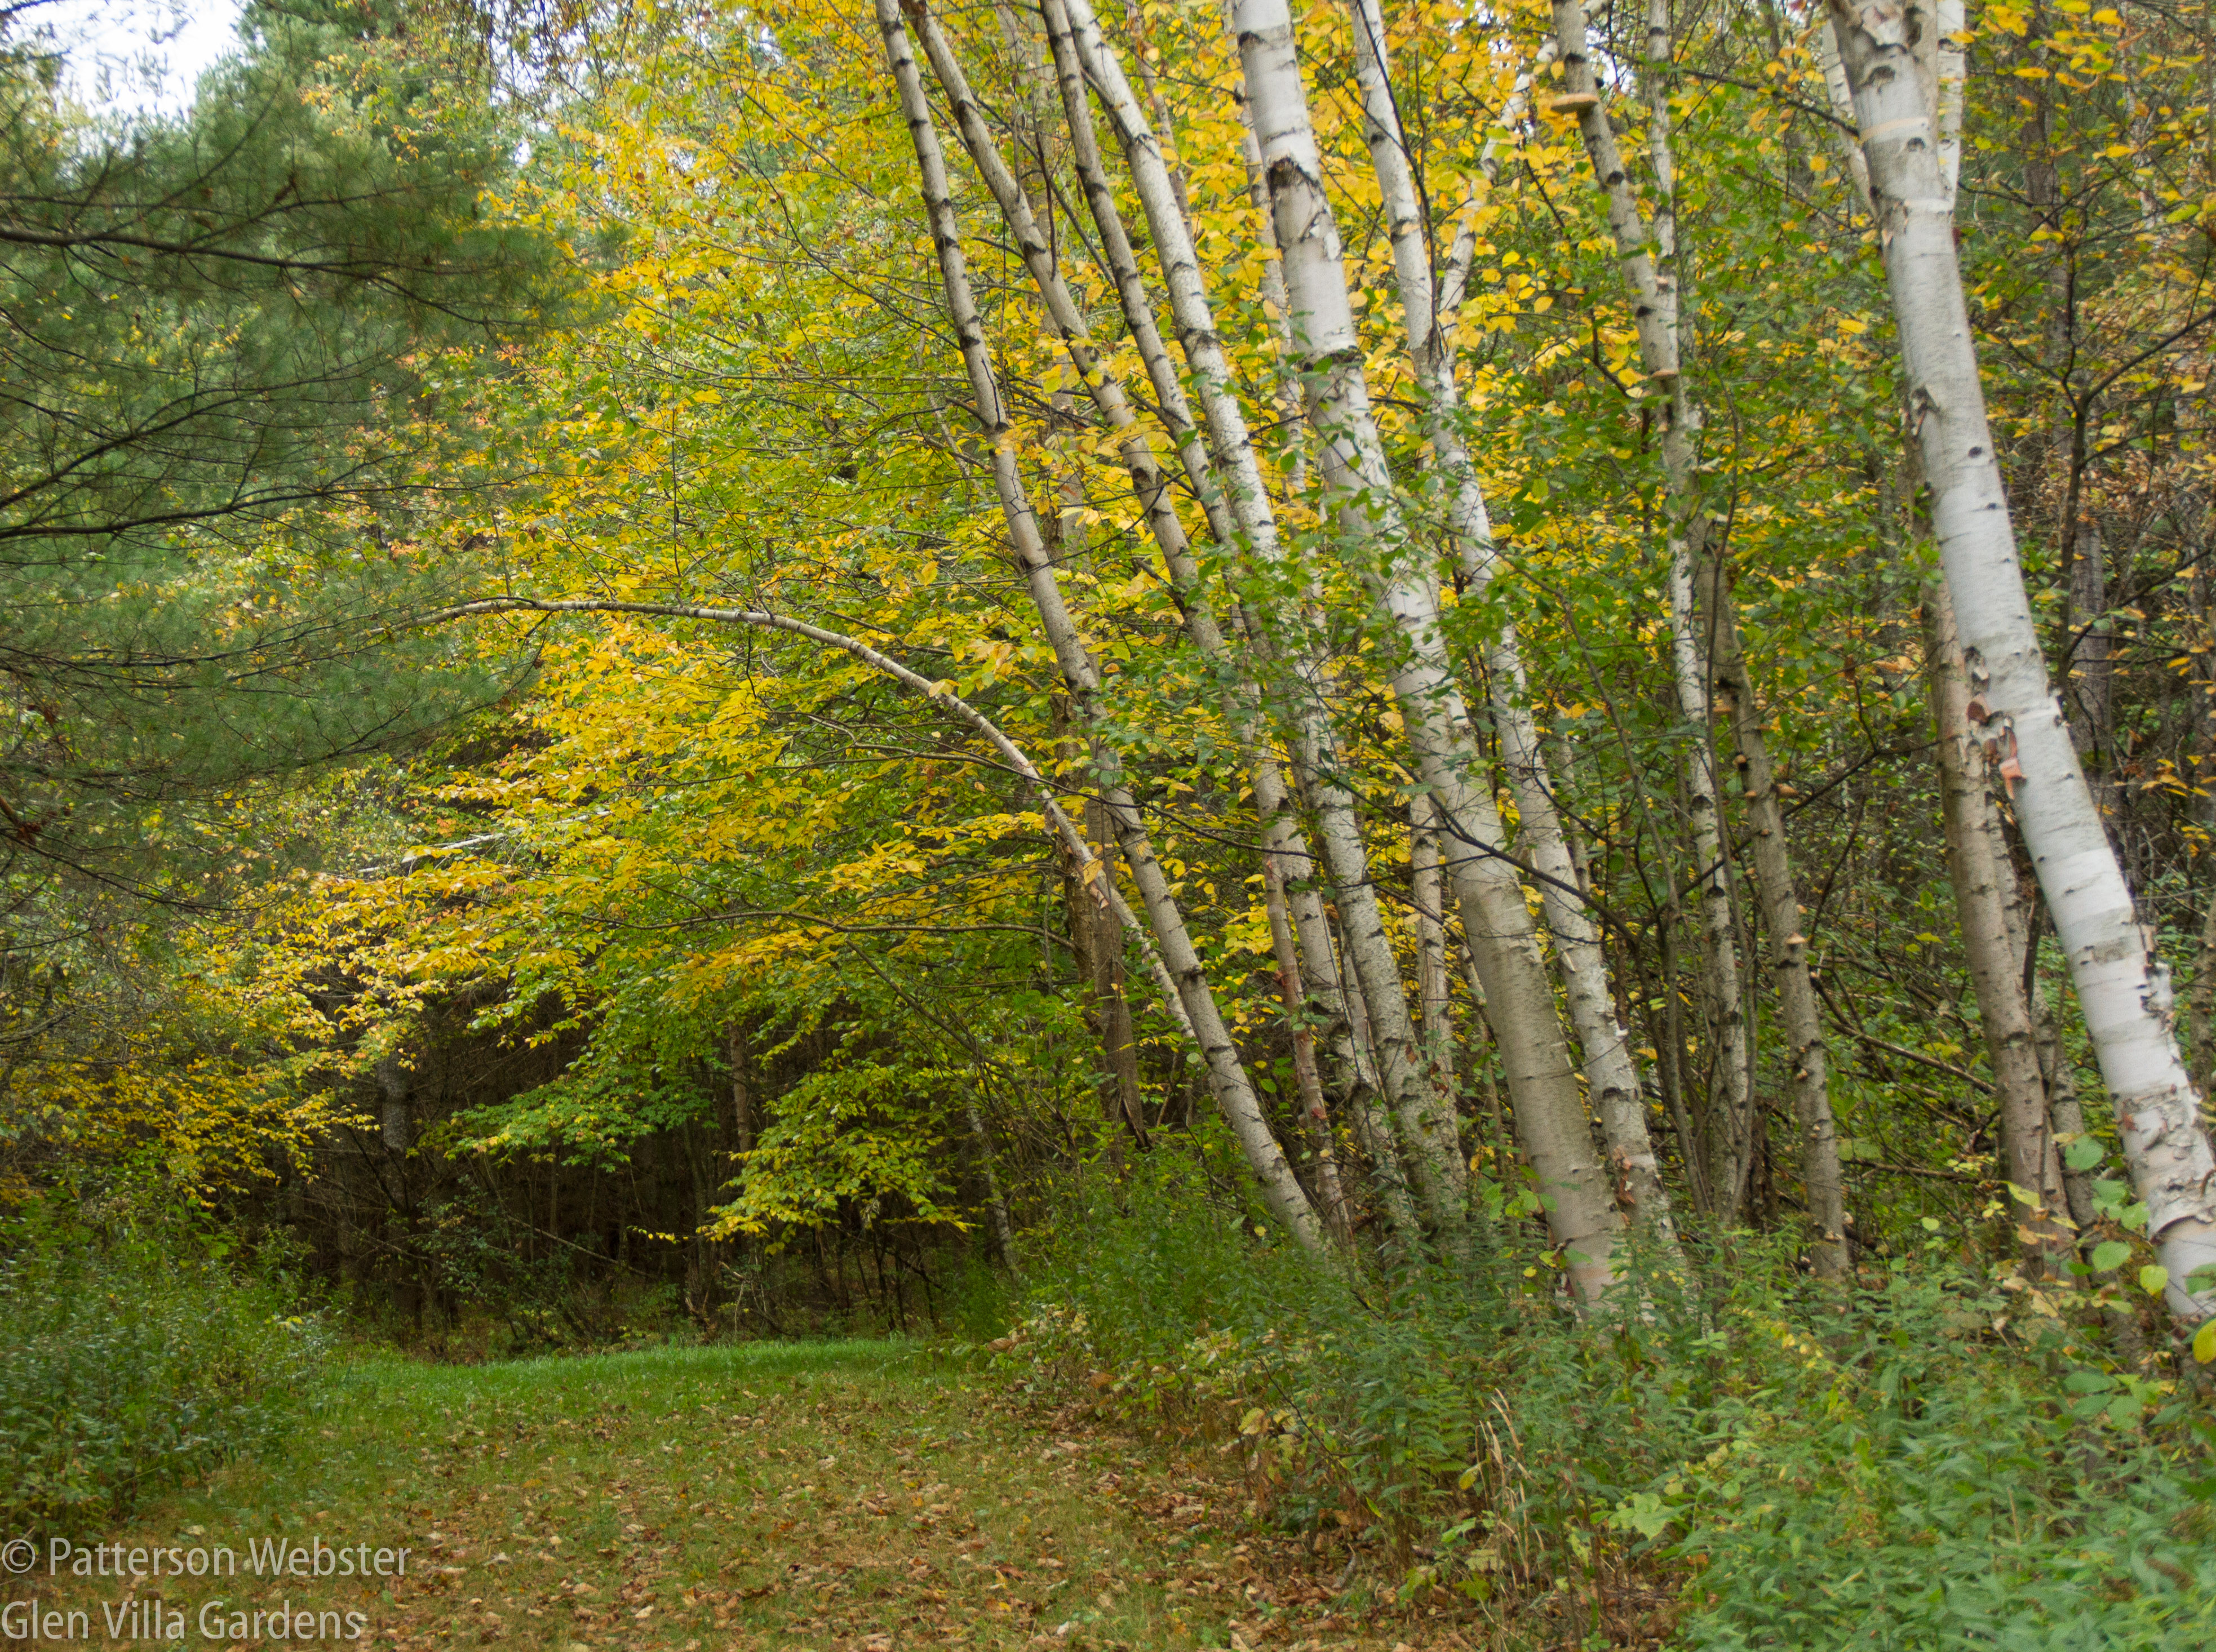 White birch trunks are common in the Eastern Townships of Quebec.